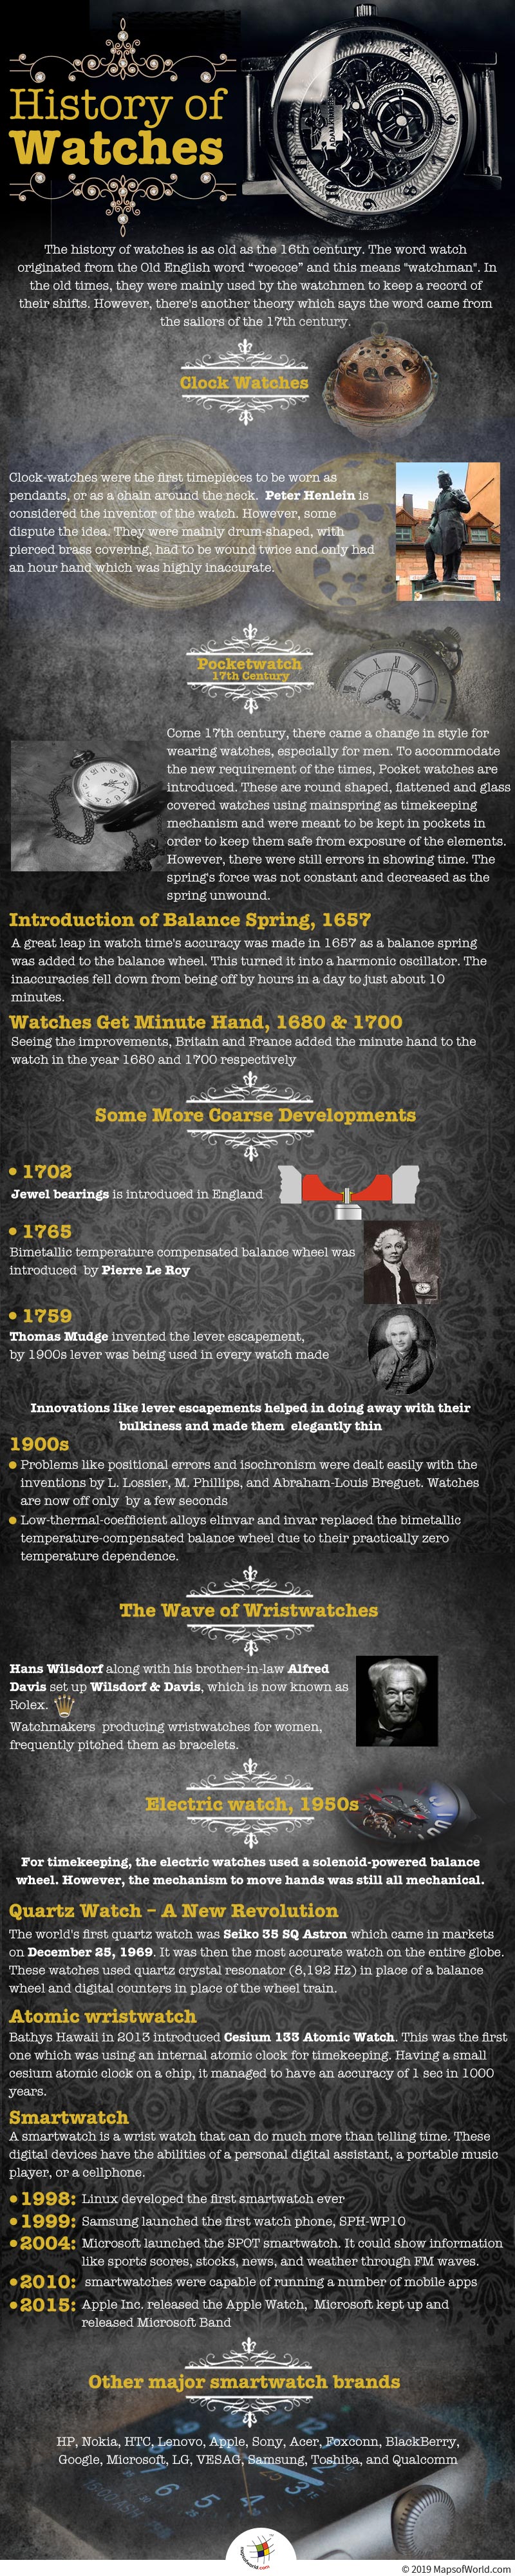 Infographic Giving Information on How Watches came into Existence